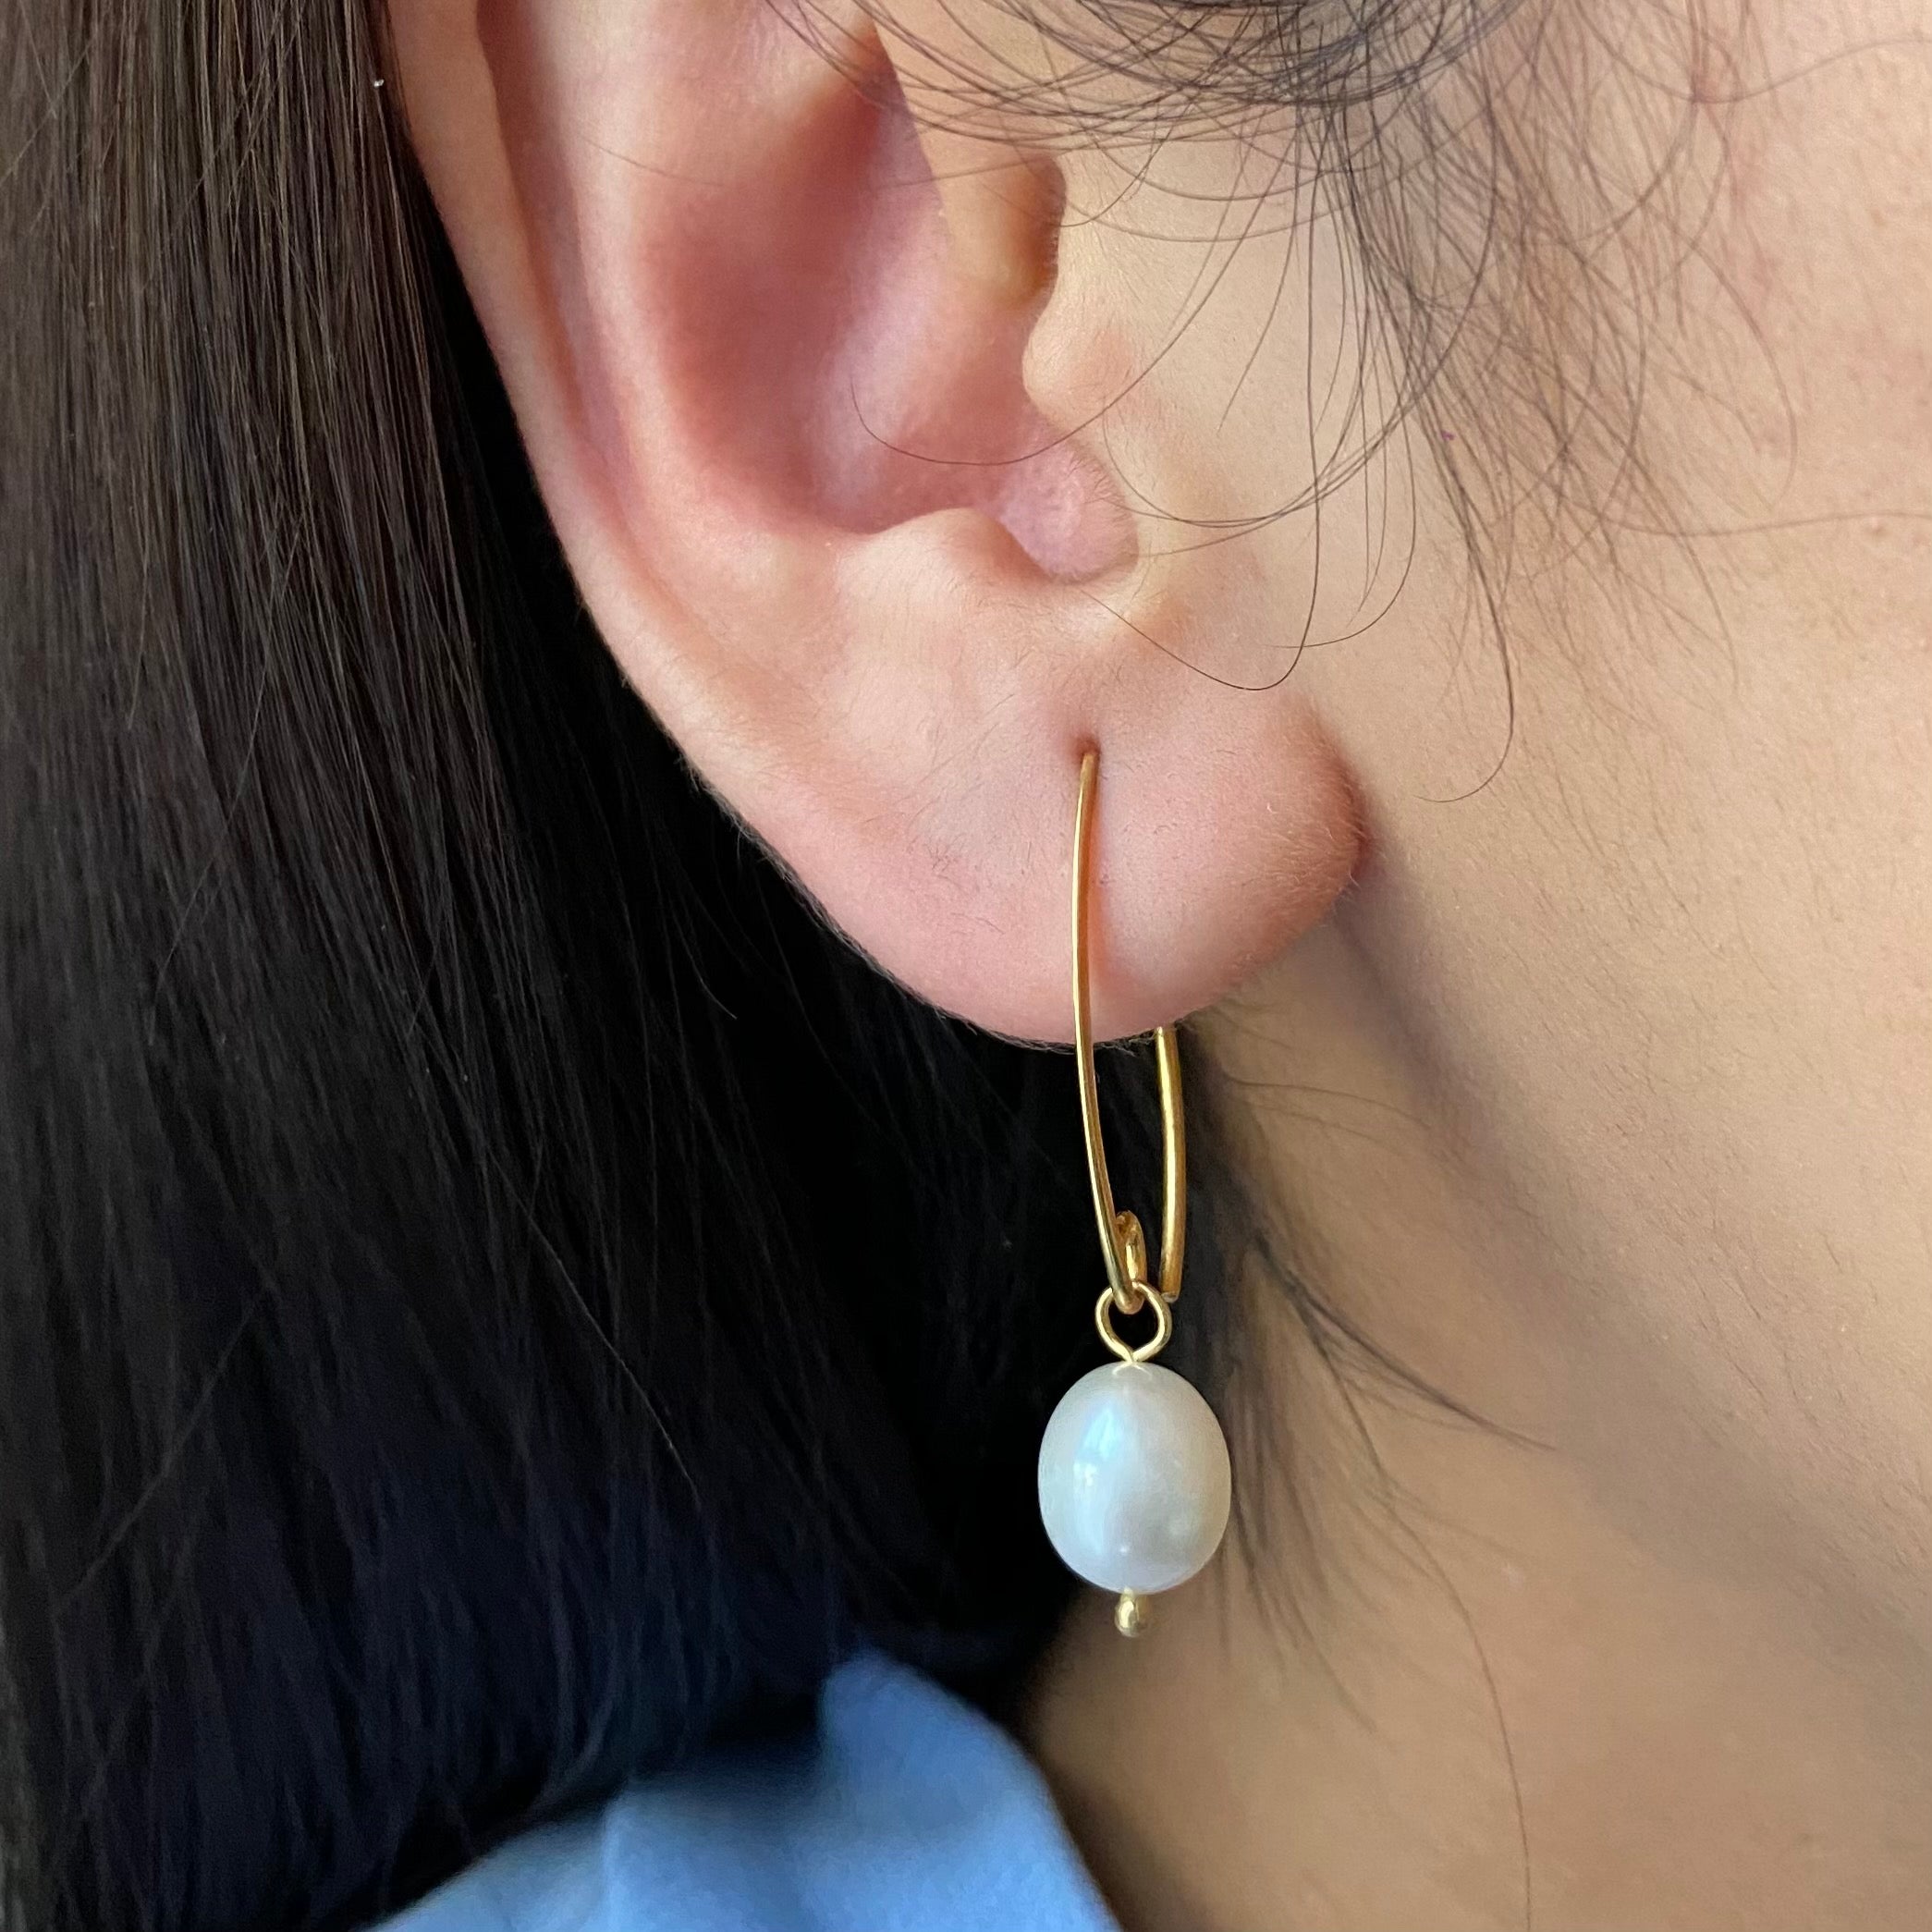 Gold Plated Sterling Silver Threader Hook Earrings - Pearl